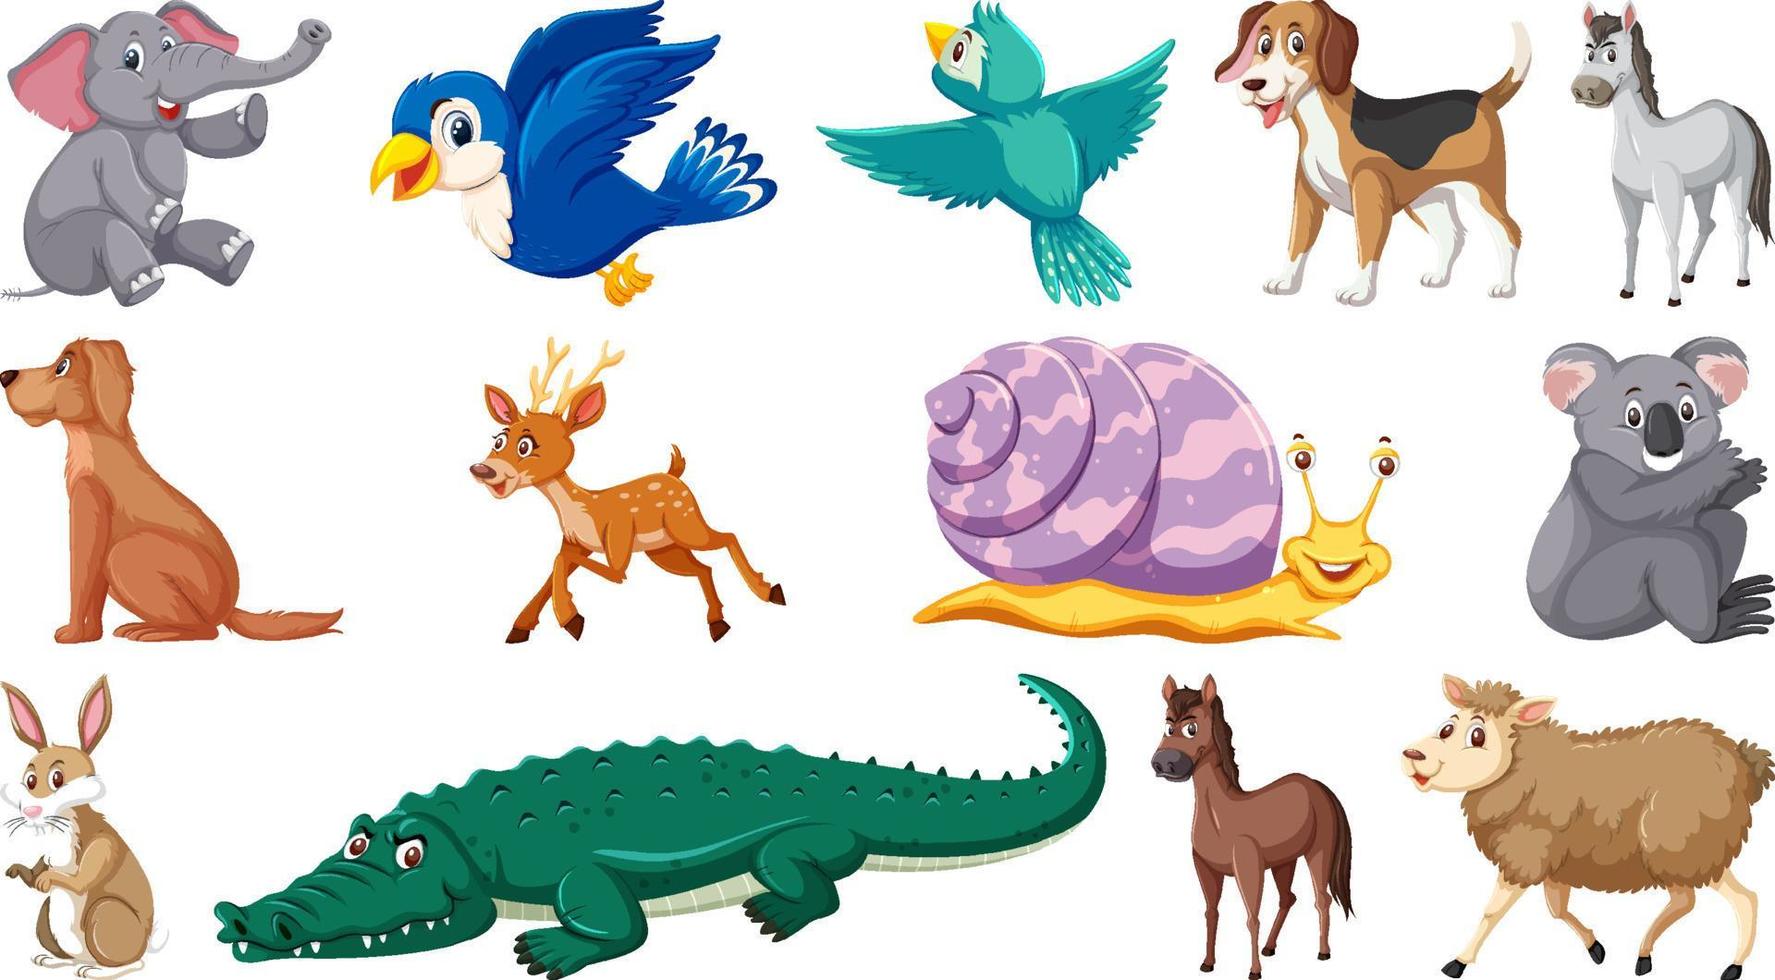 Set of isolated different animals vector